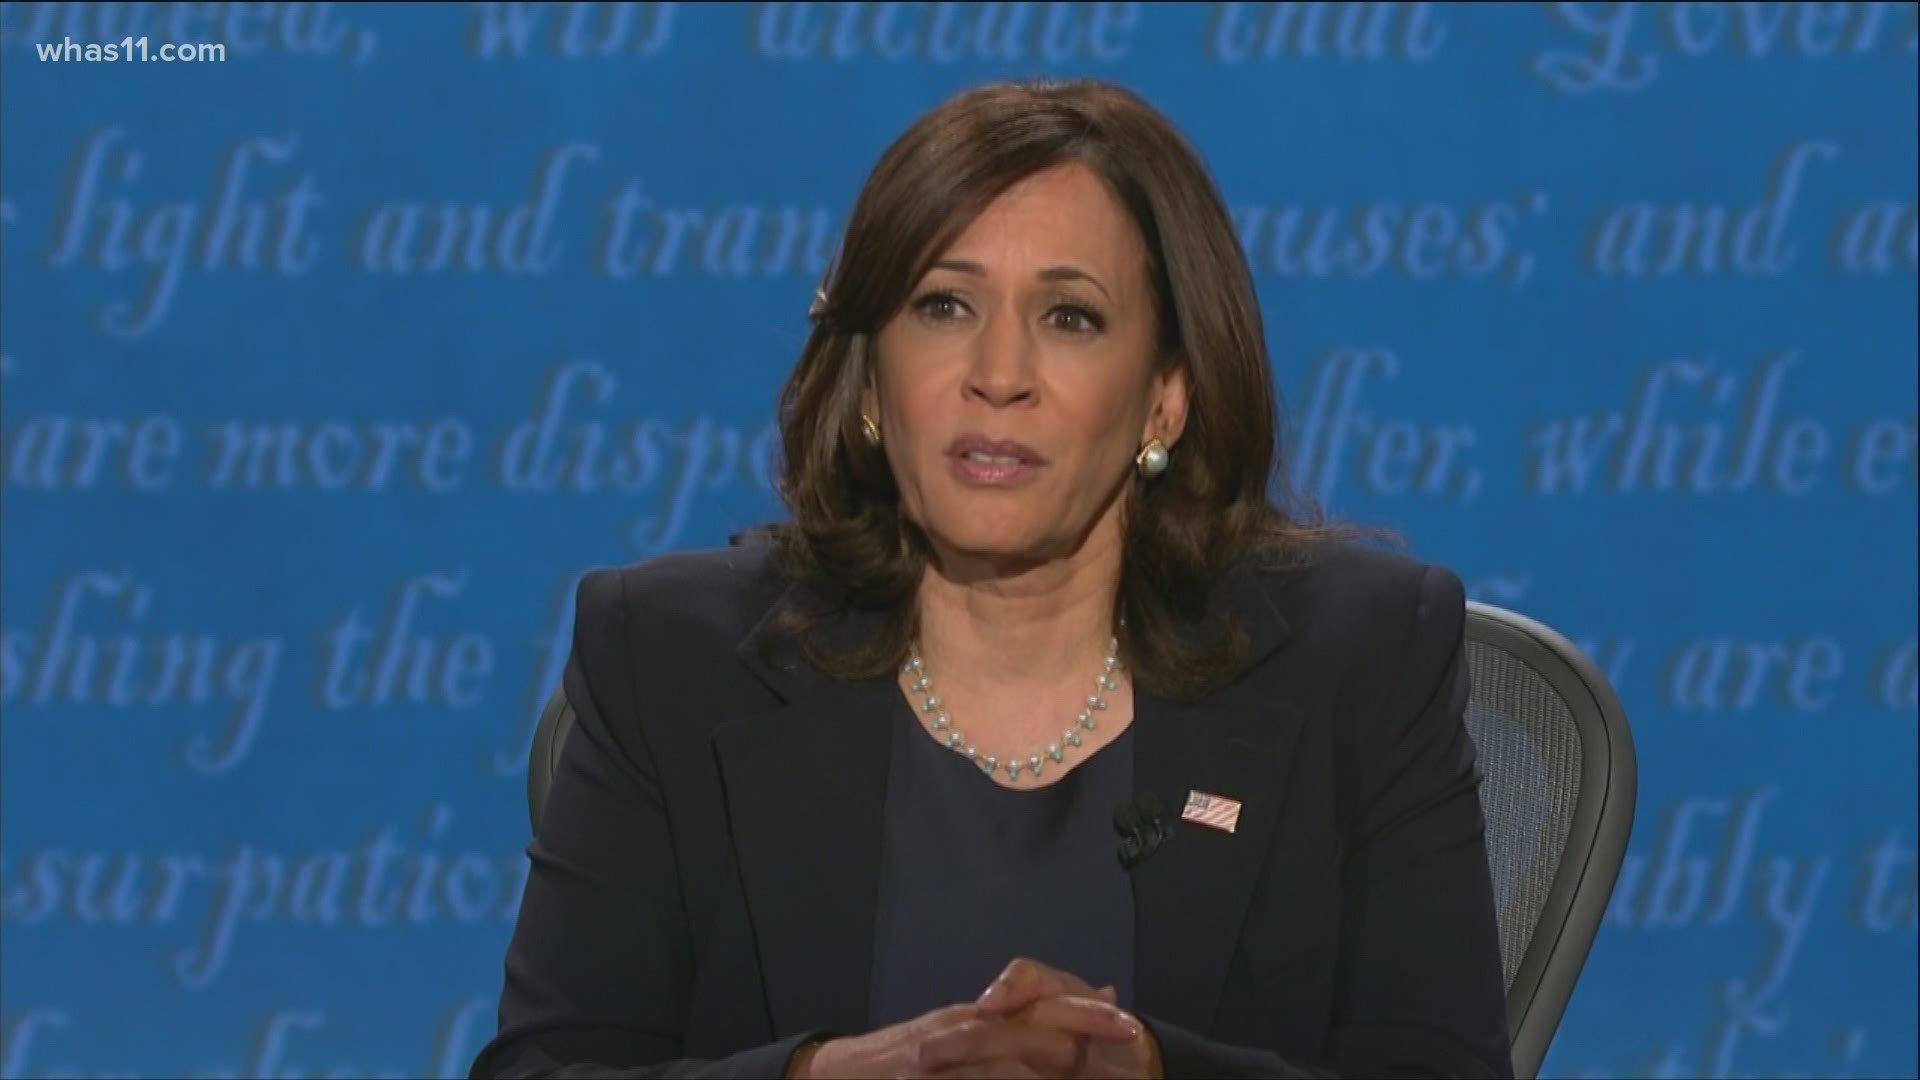 Vice President Mike Pence said he trusts the justice system, while Sen. Kamala Harris said she did not believe justice was served.